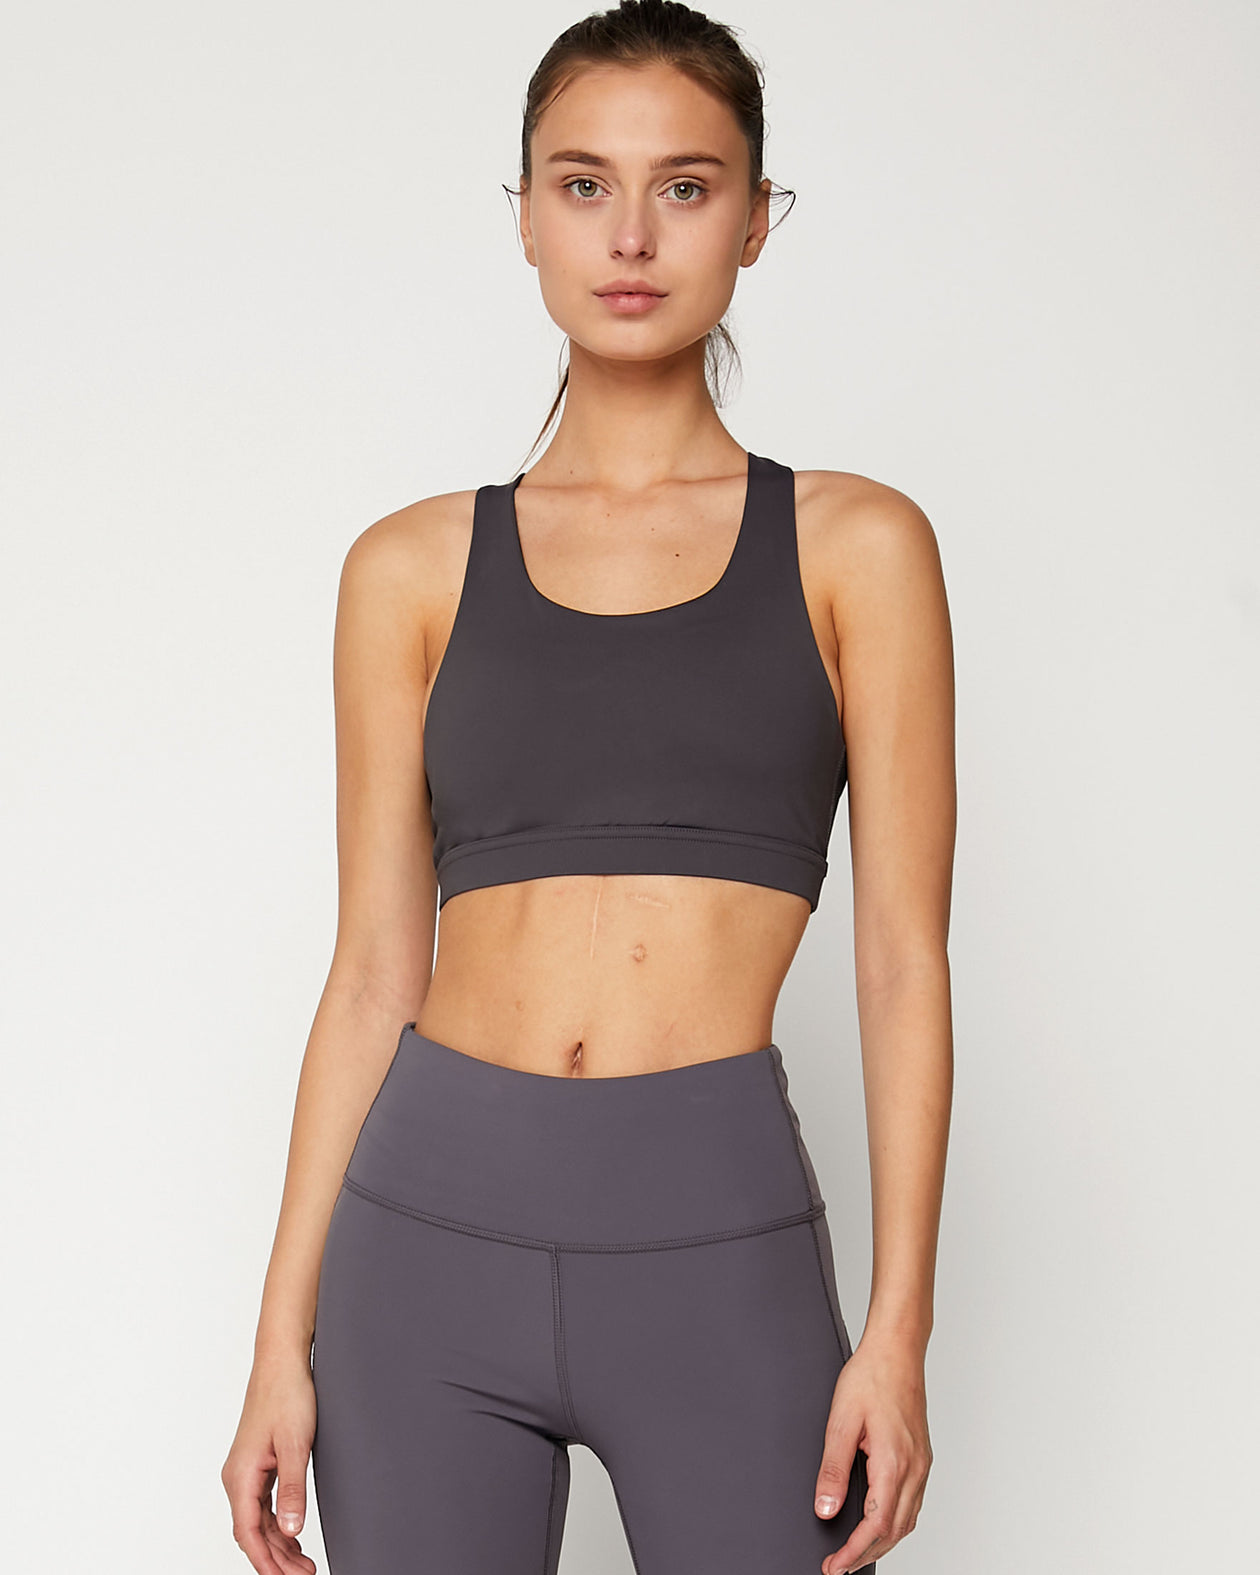 The Gym People, Tops, Charcoal Grey Womens Sports Bra Longline